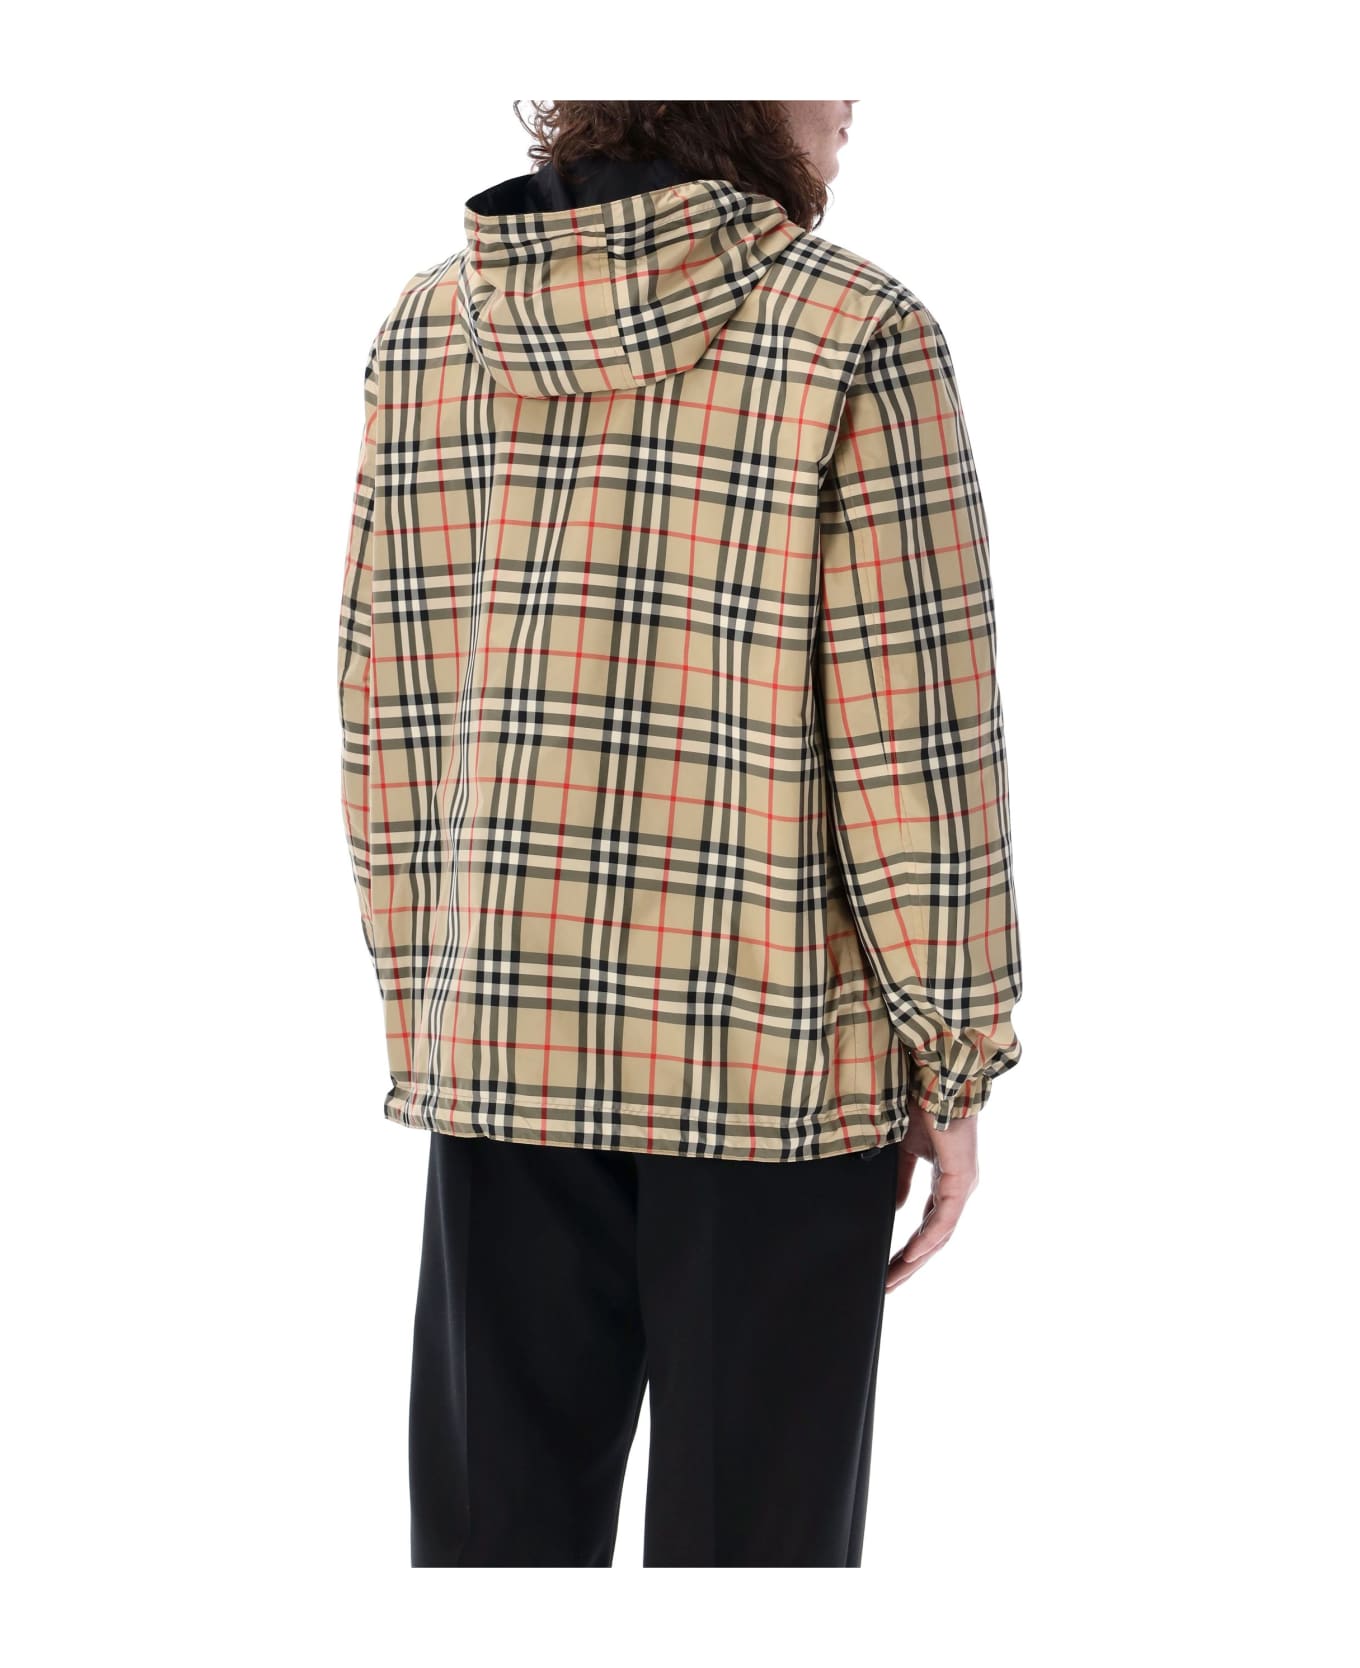 Burberry London Reversible Check Jacket - ARCHIVE BEIGE IP CHK